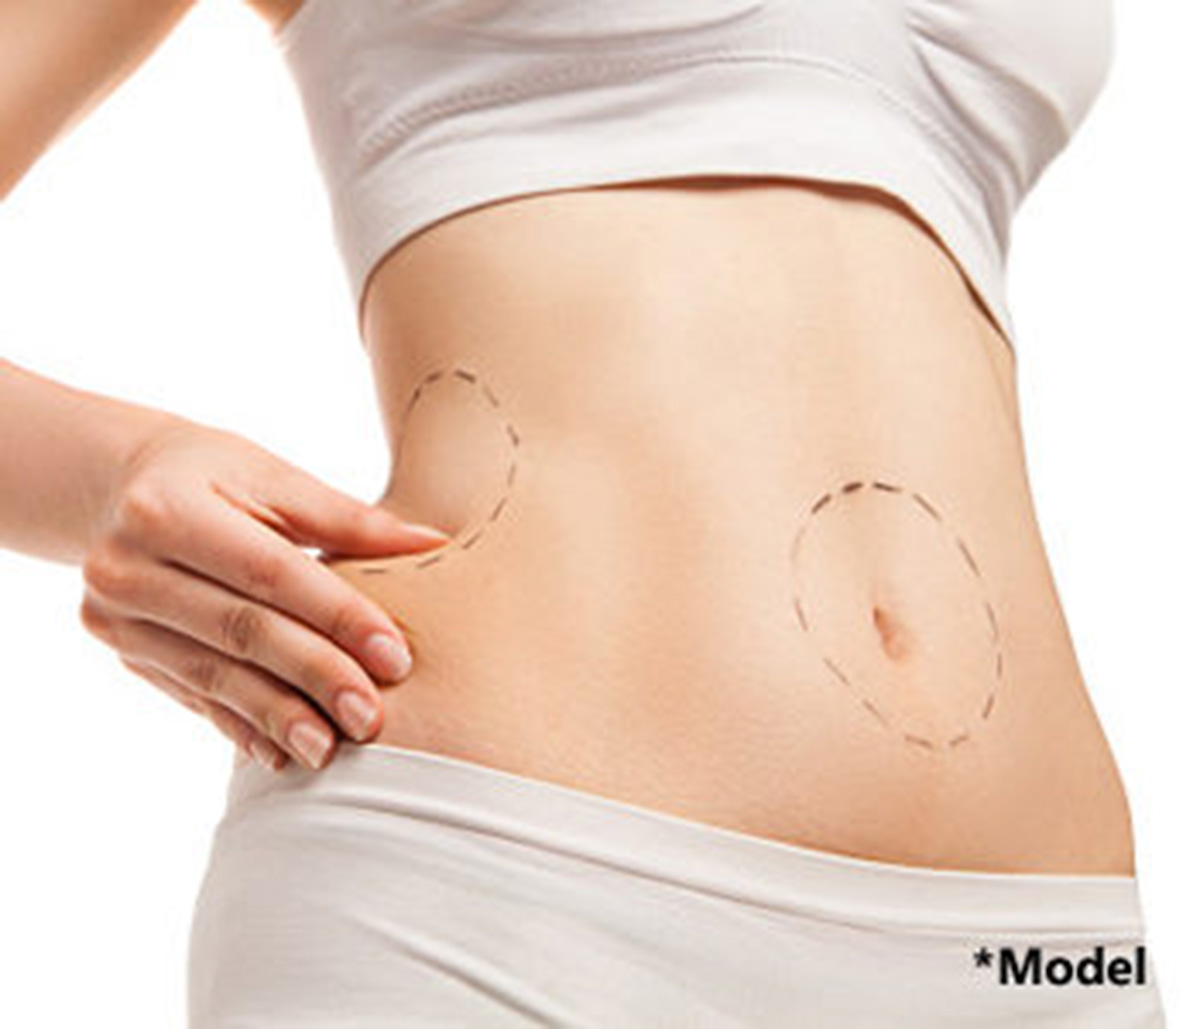 Tummy Tuck Plastic Surgery in Beverly Hills - Lose Belly Fat